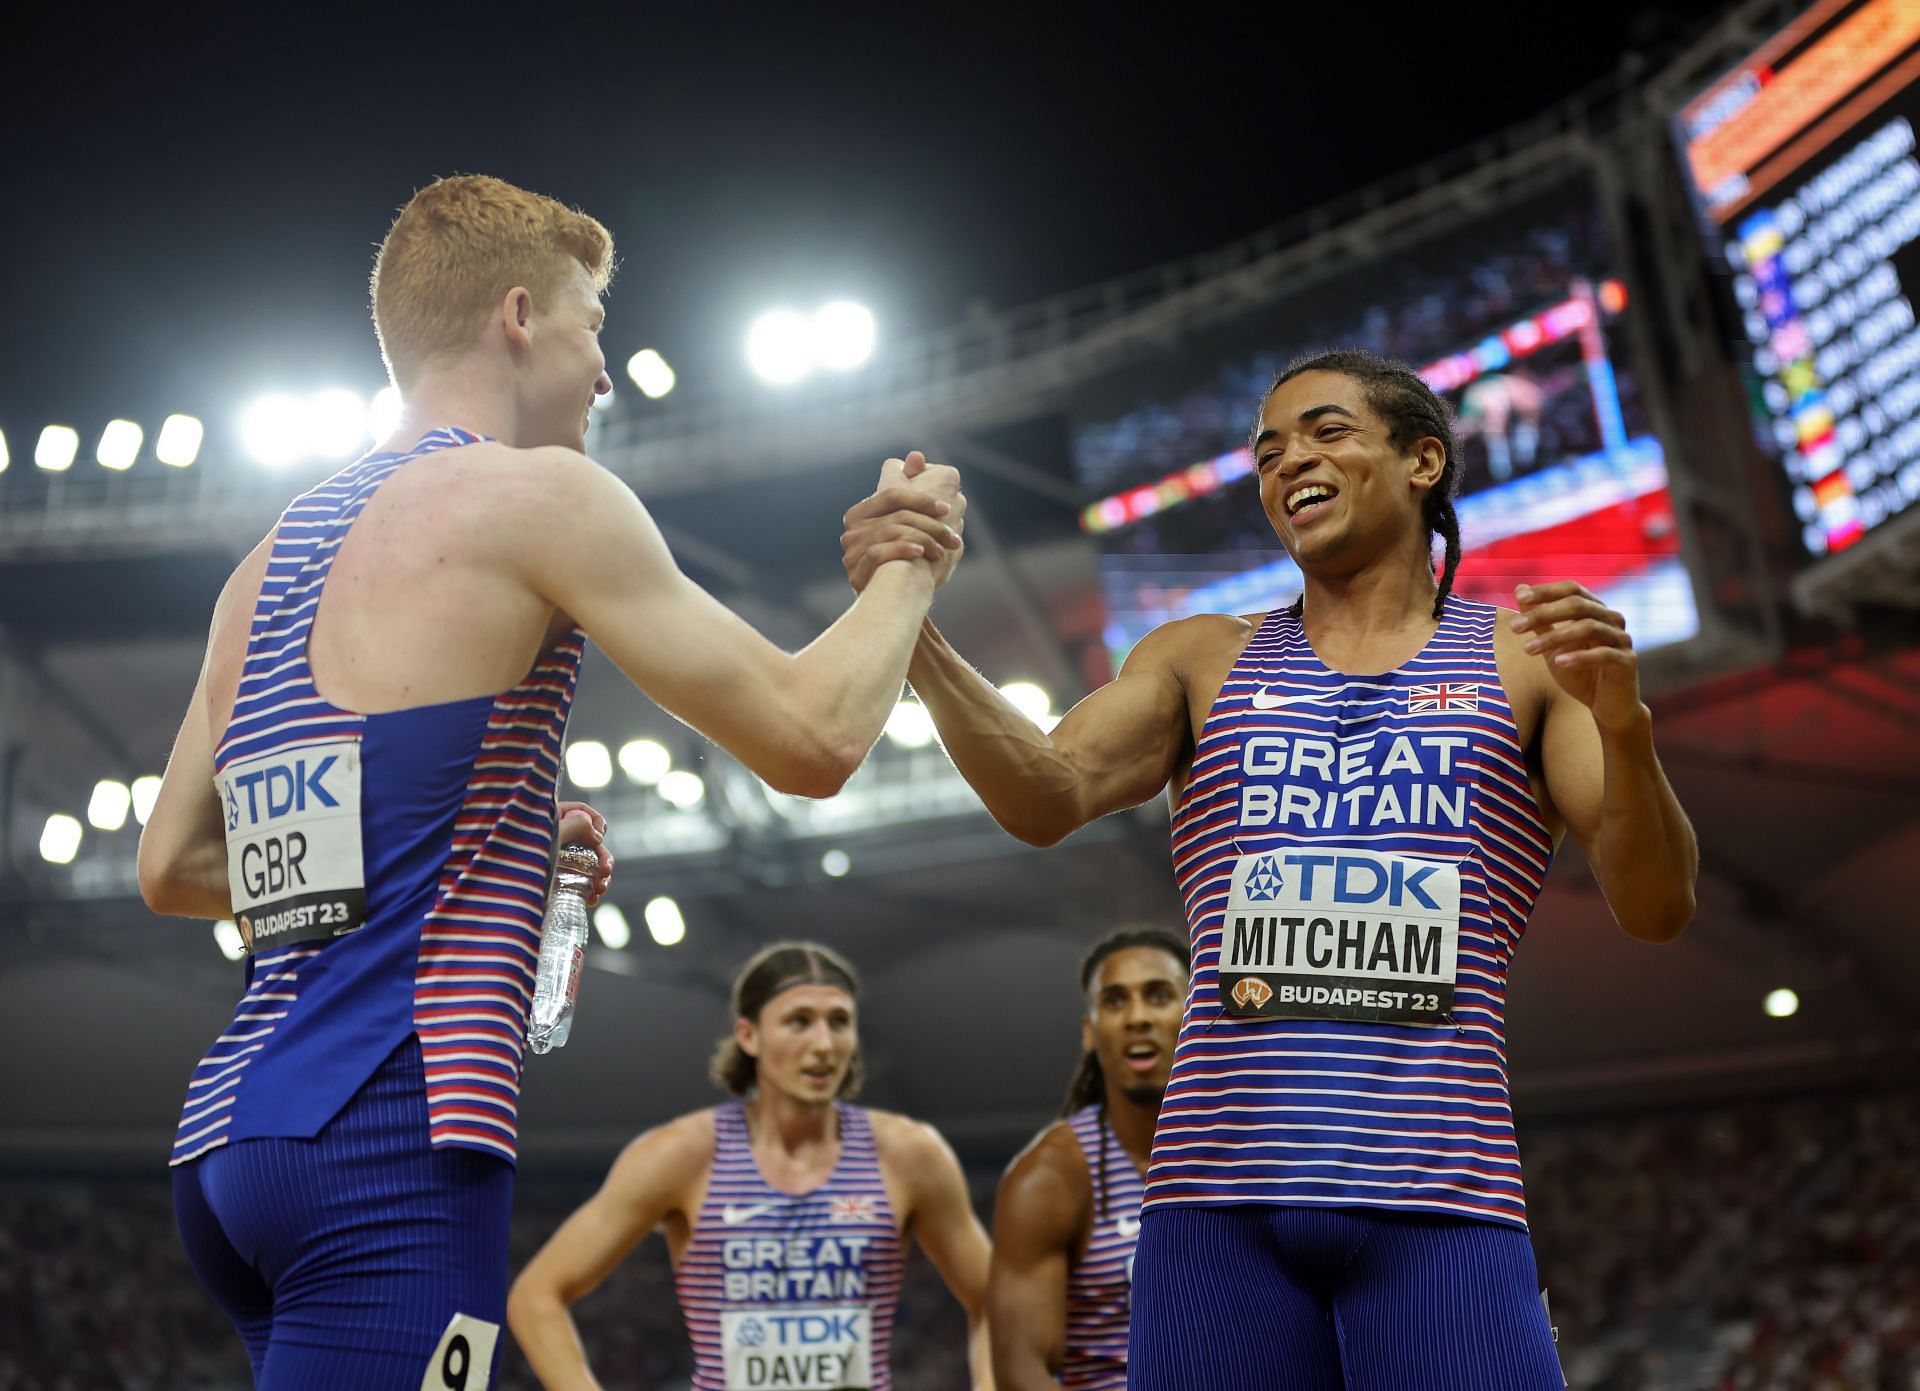 Rio Mitcham and Charlie Dobson of Team Great Britain celebrate after winning bronze at World Athletics Championships Budapest 2023. (Photo by Steph Chambers/Getty Images)